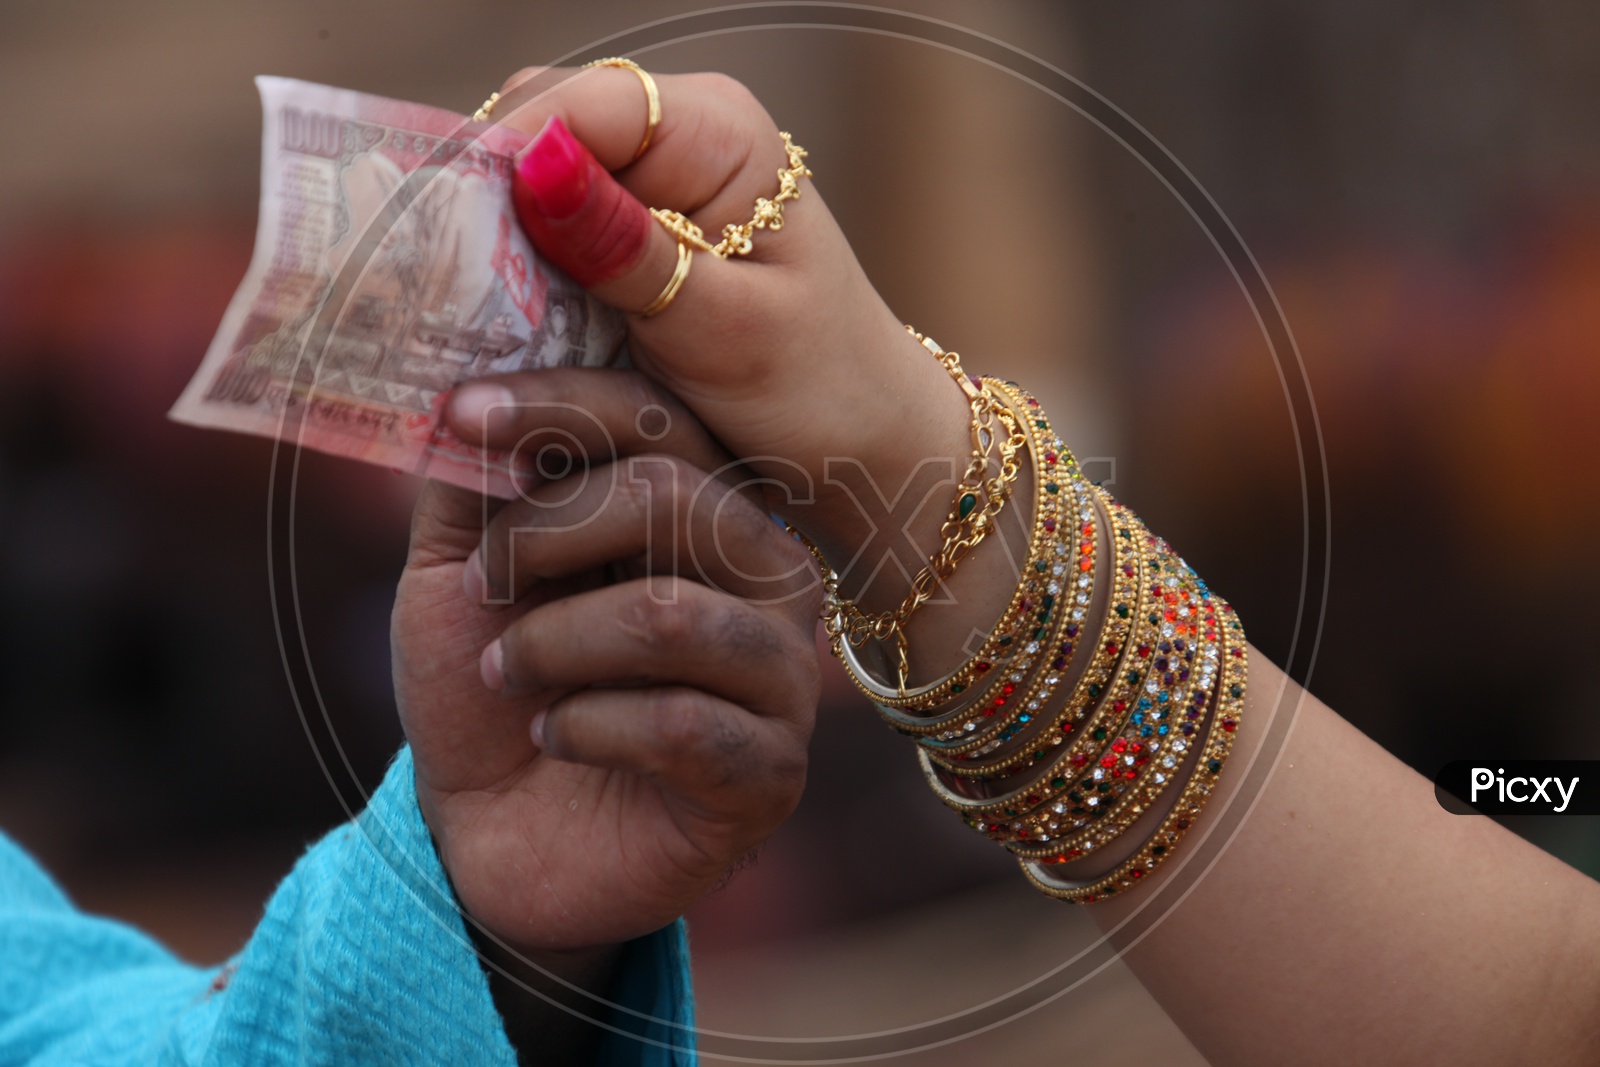 A Man Taking a Currency Note From a Lady Hand Closeup